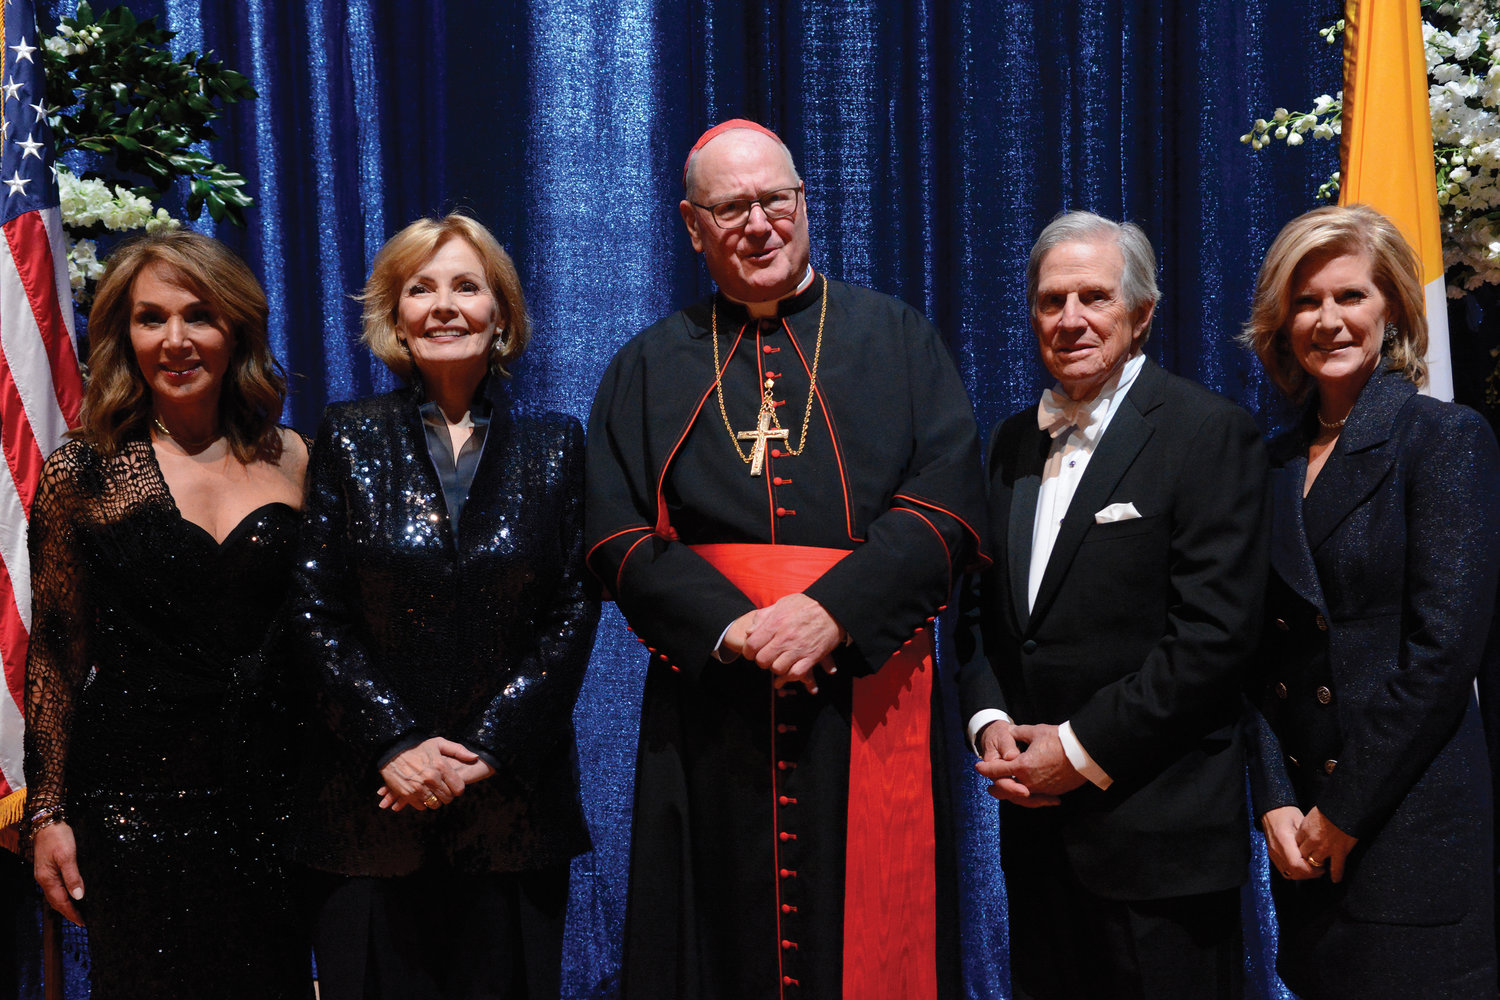 Cardinal Dolan greets honorees at the opening reception. From left are Rosanna Scotto, mistress of ceremonies; keynote speaker Peggy Noonan; Peter T. Grauer, the Happy Warrior honoree; and Mary Callaghan Erdoes, vice chair of the Alfred E. Smith Memorial Foundation.